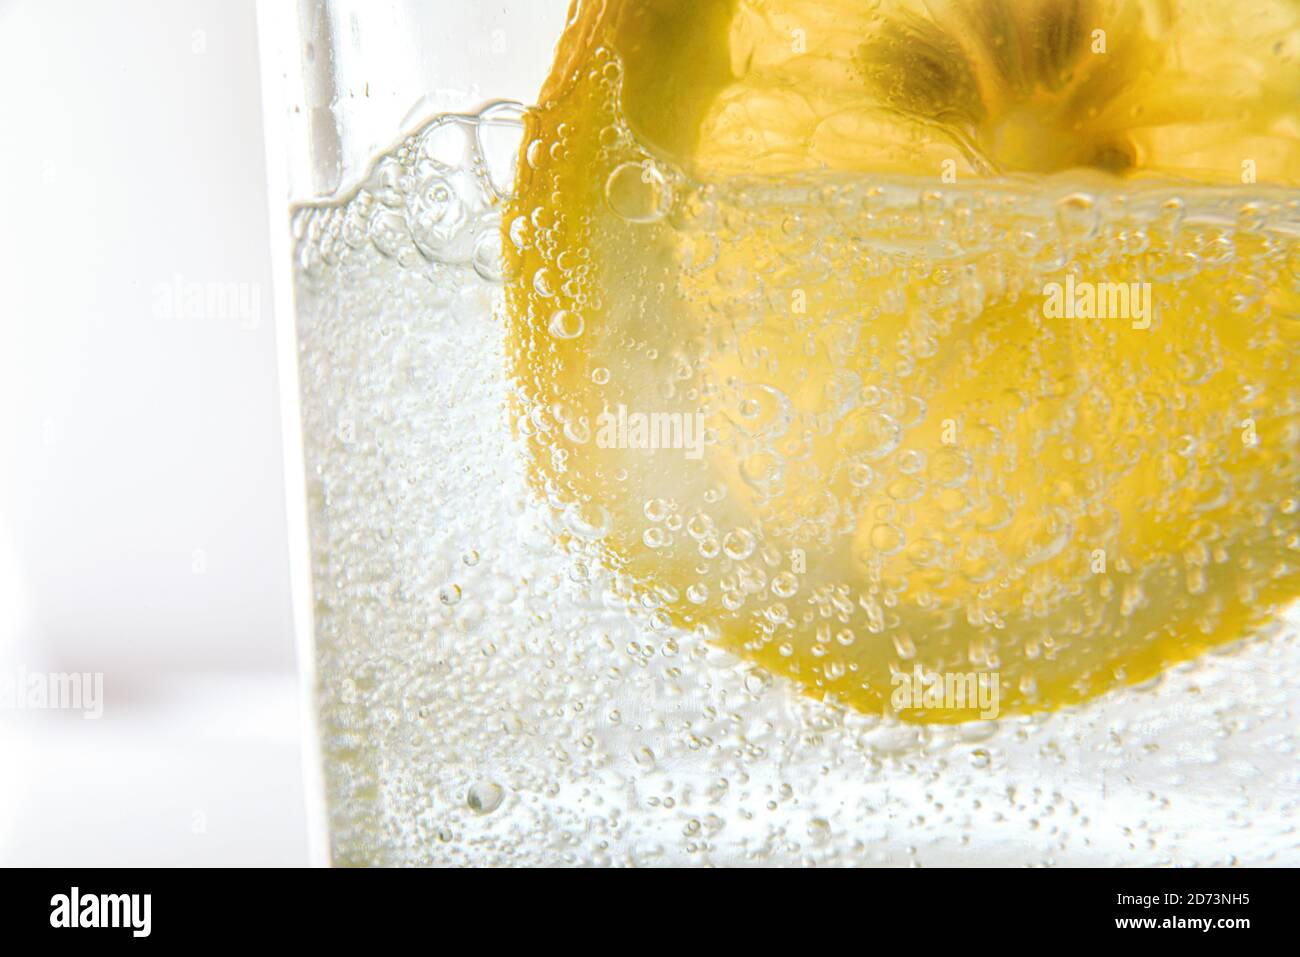 Detail of glass with sparkling water and lemon slice front view Stock Photo